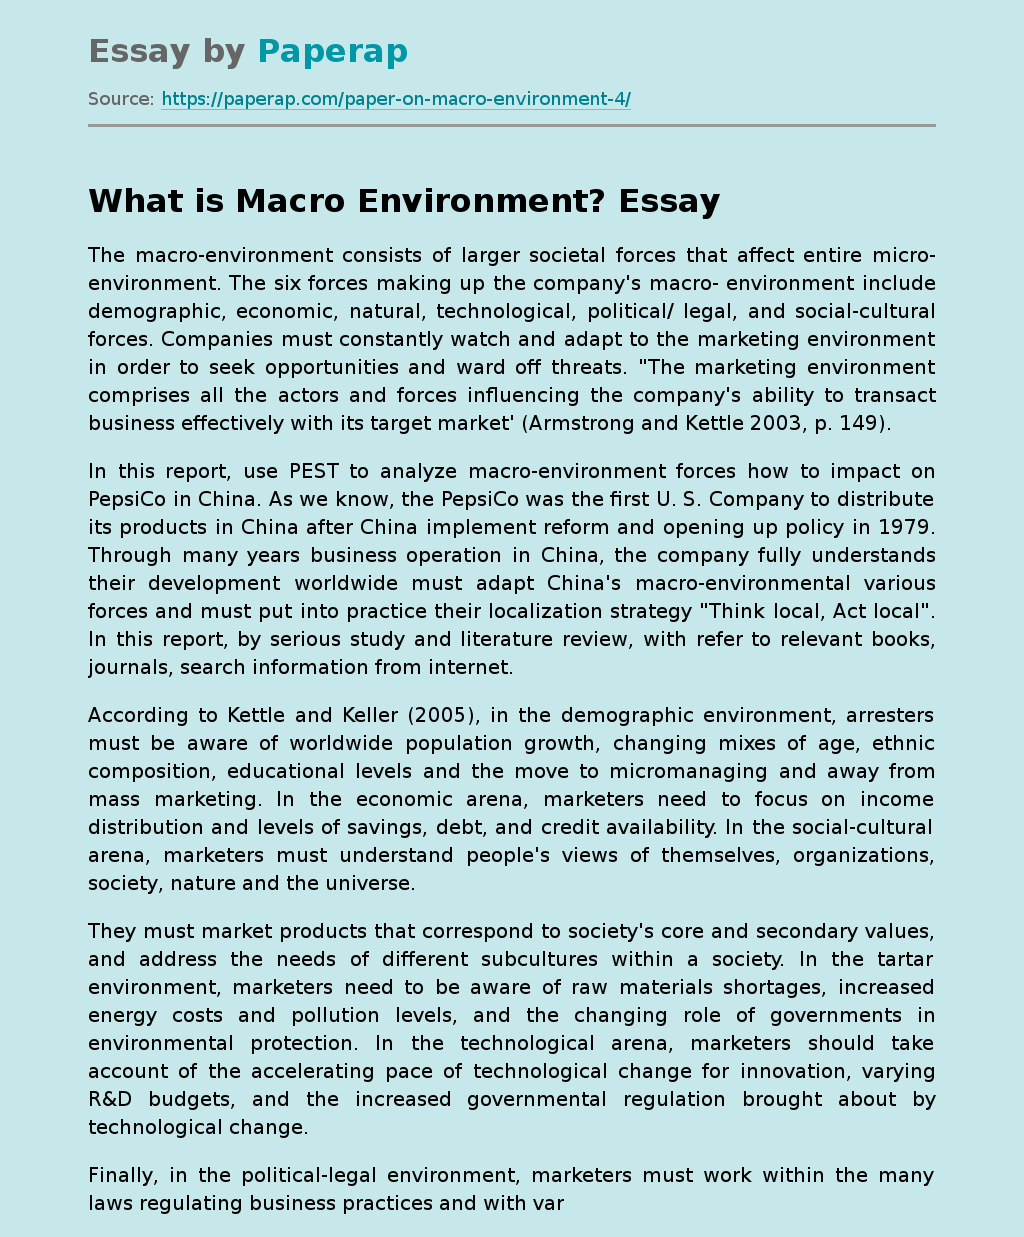 What is Macro Environment?